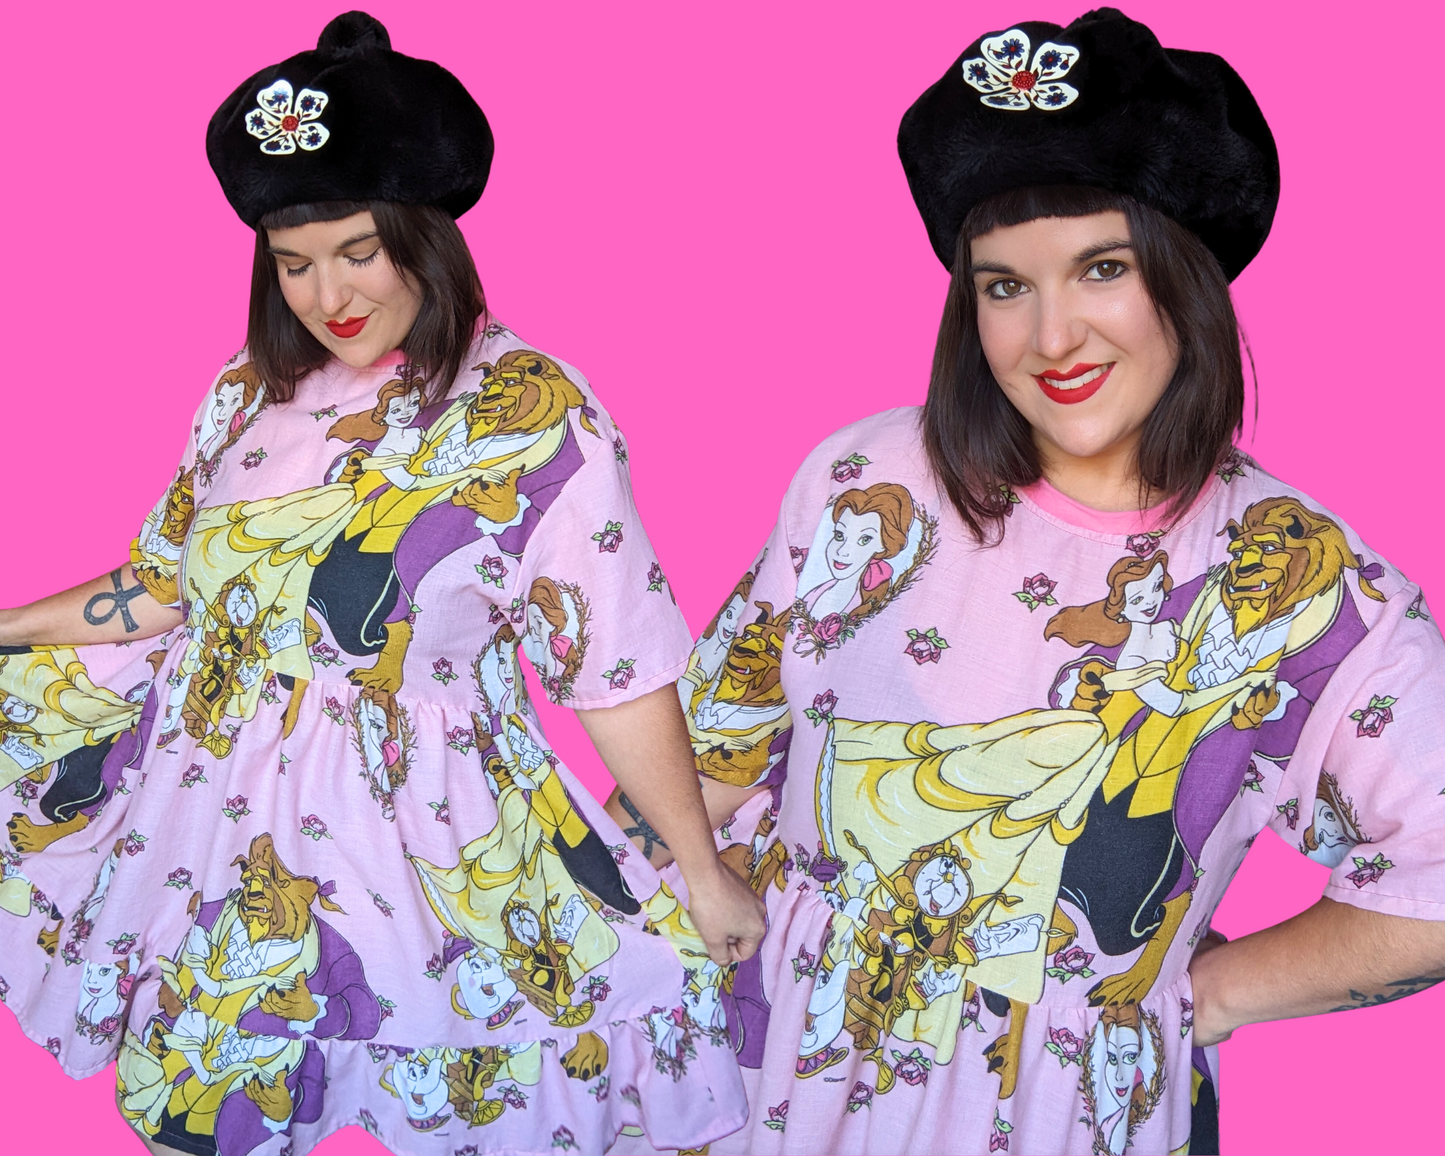 MADE TO ORDER, Handmade, Upcycled Vintage 1990's Walt Disney's Beauty and The Beast Bedsheet T-Shirt Dress Fits S-M-L-XL